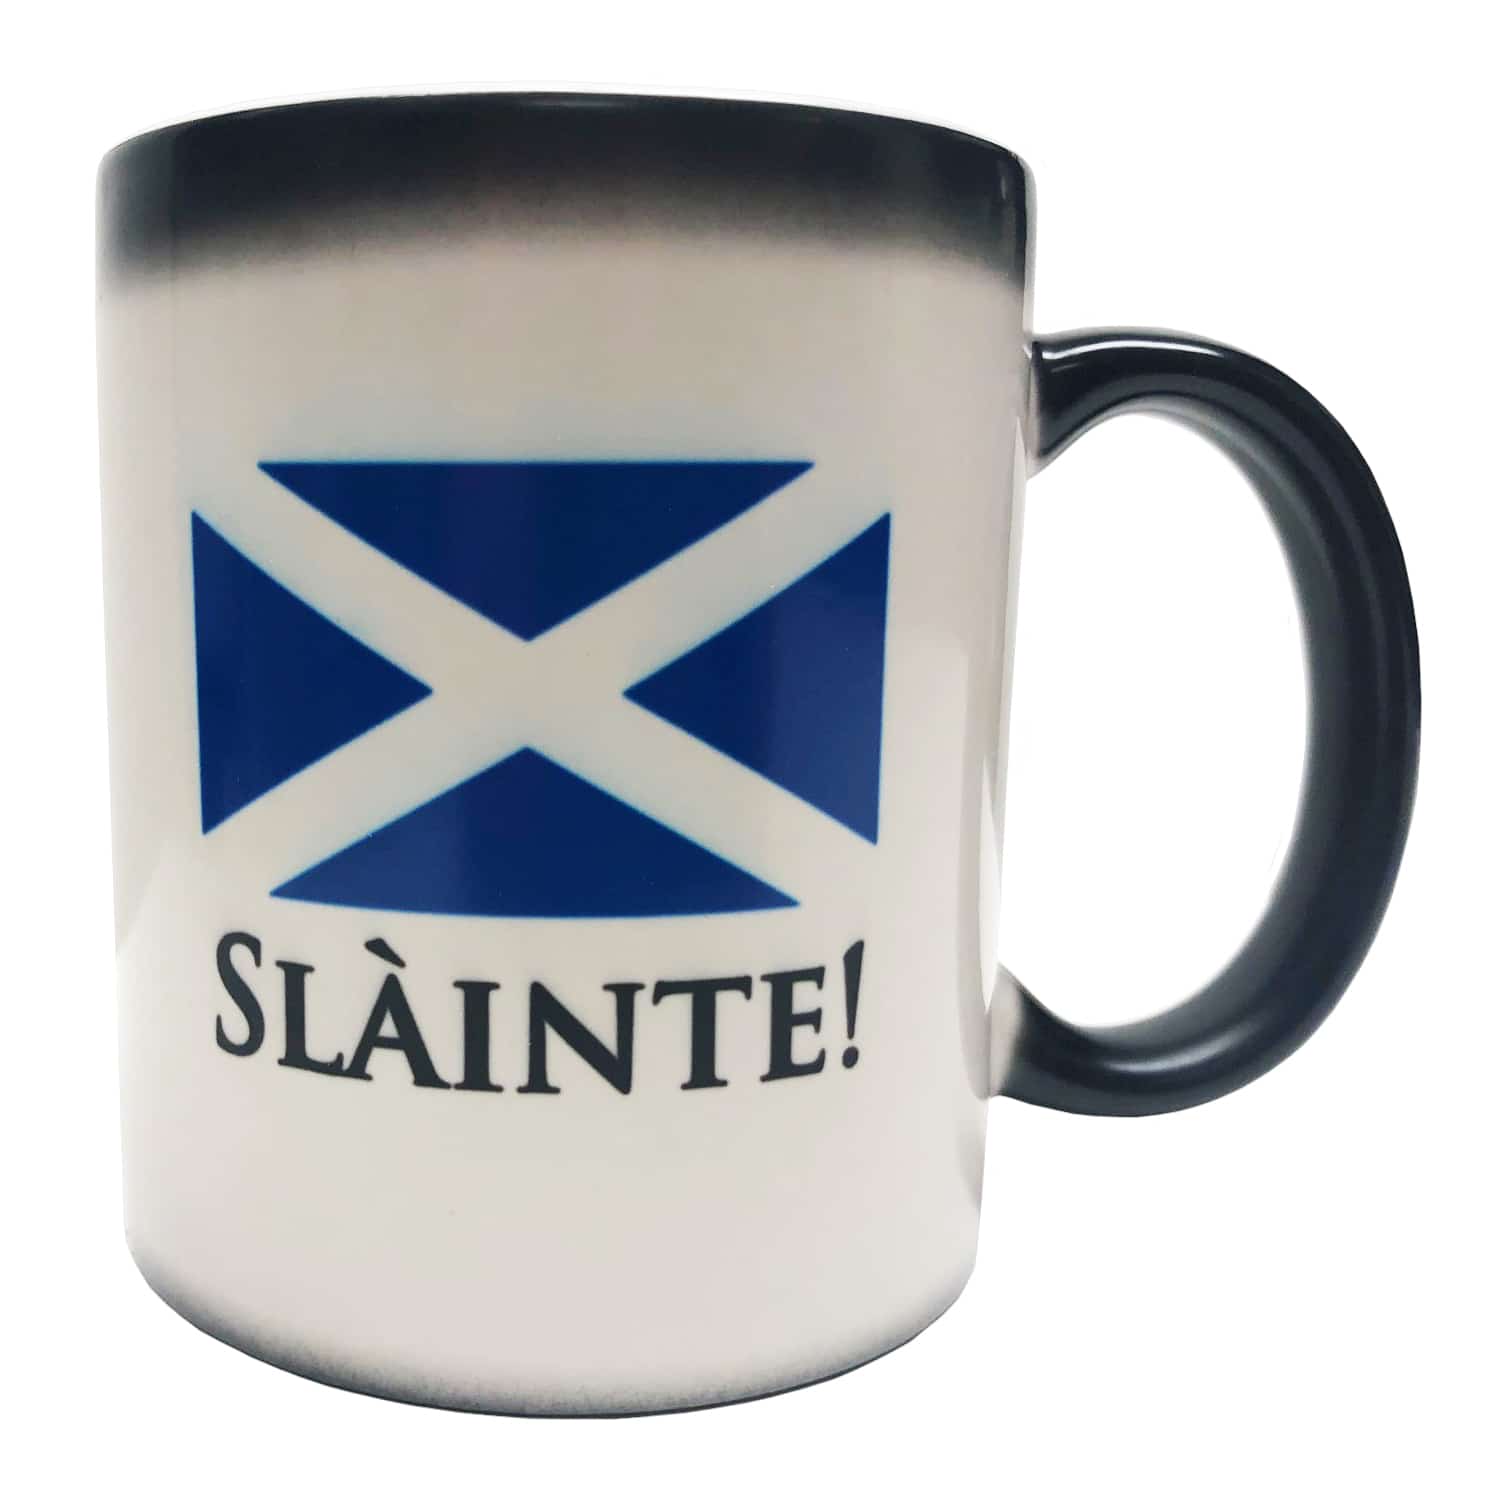 A Scottish flag mug with the word Slàinte Color Changing Coffee Mug Special Offer 50% Off! on it.